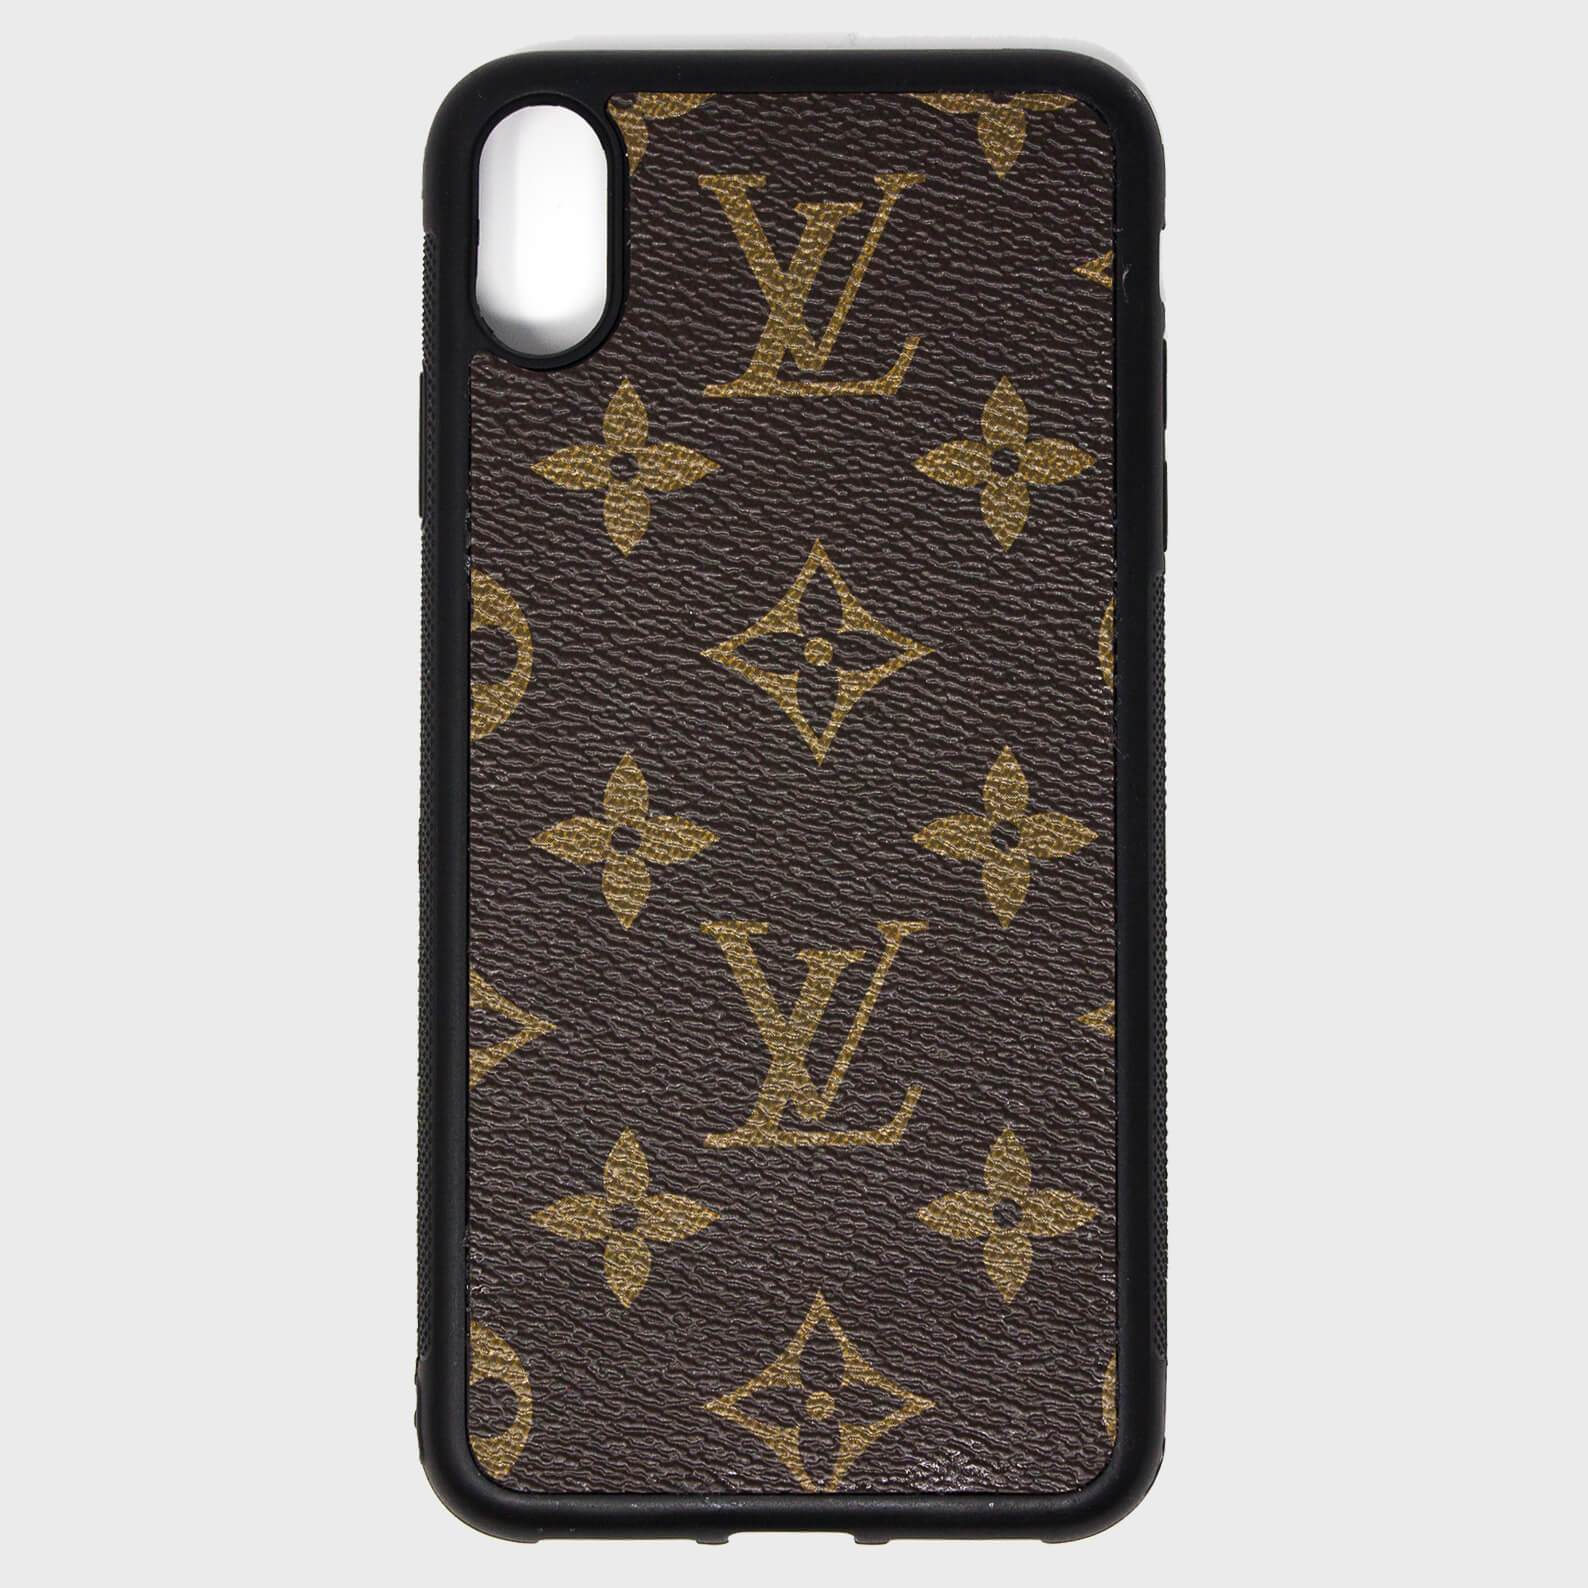 This Louis Vuitton iPhone case will cost you $5500